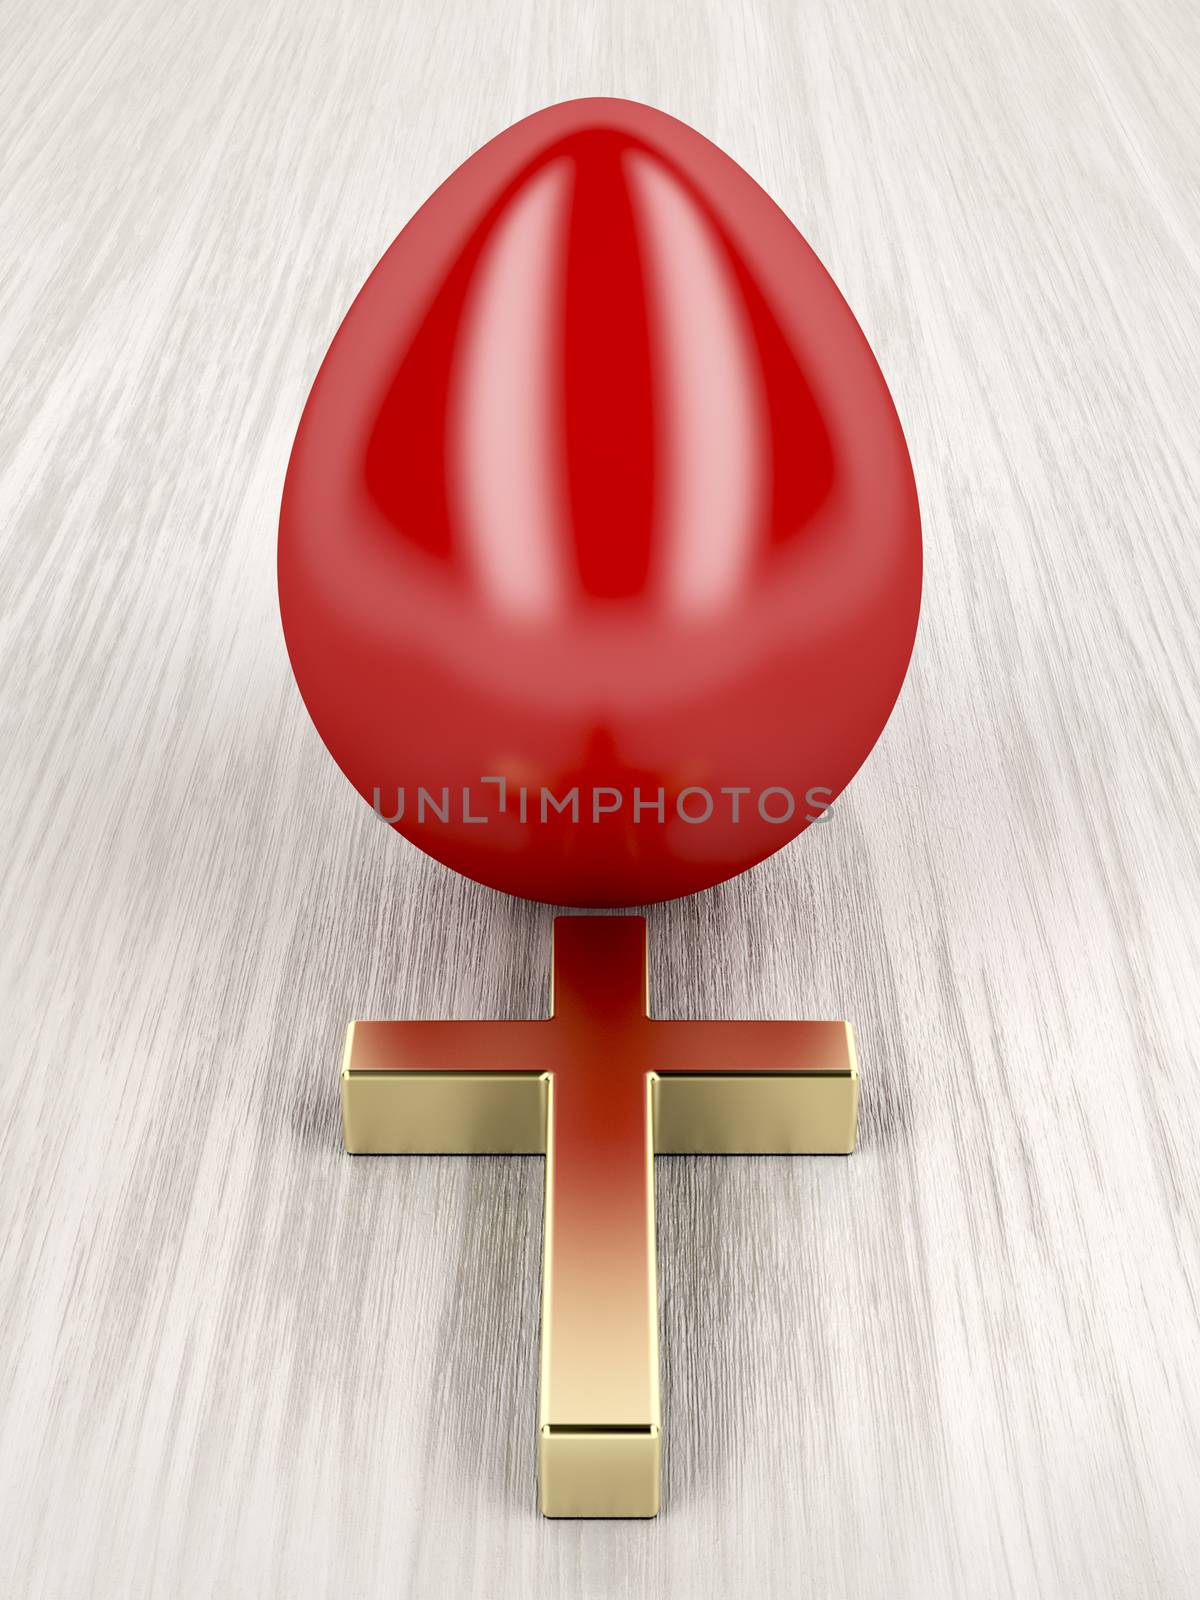 Red egg and golden cross by magraphics